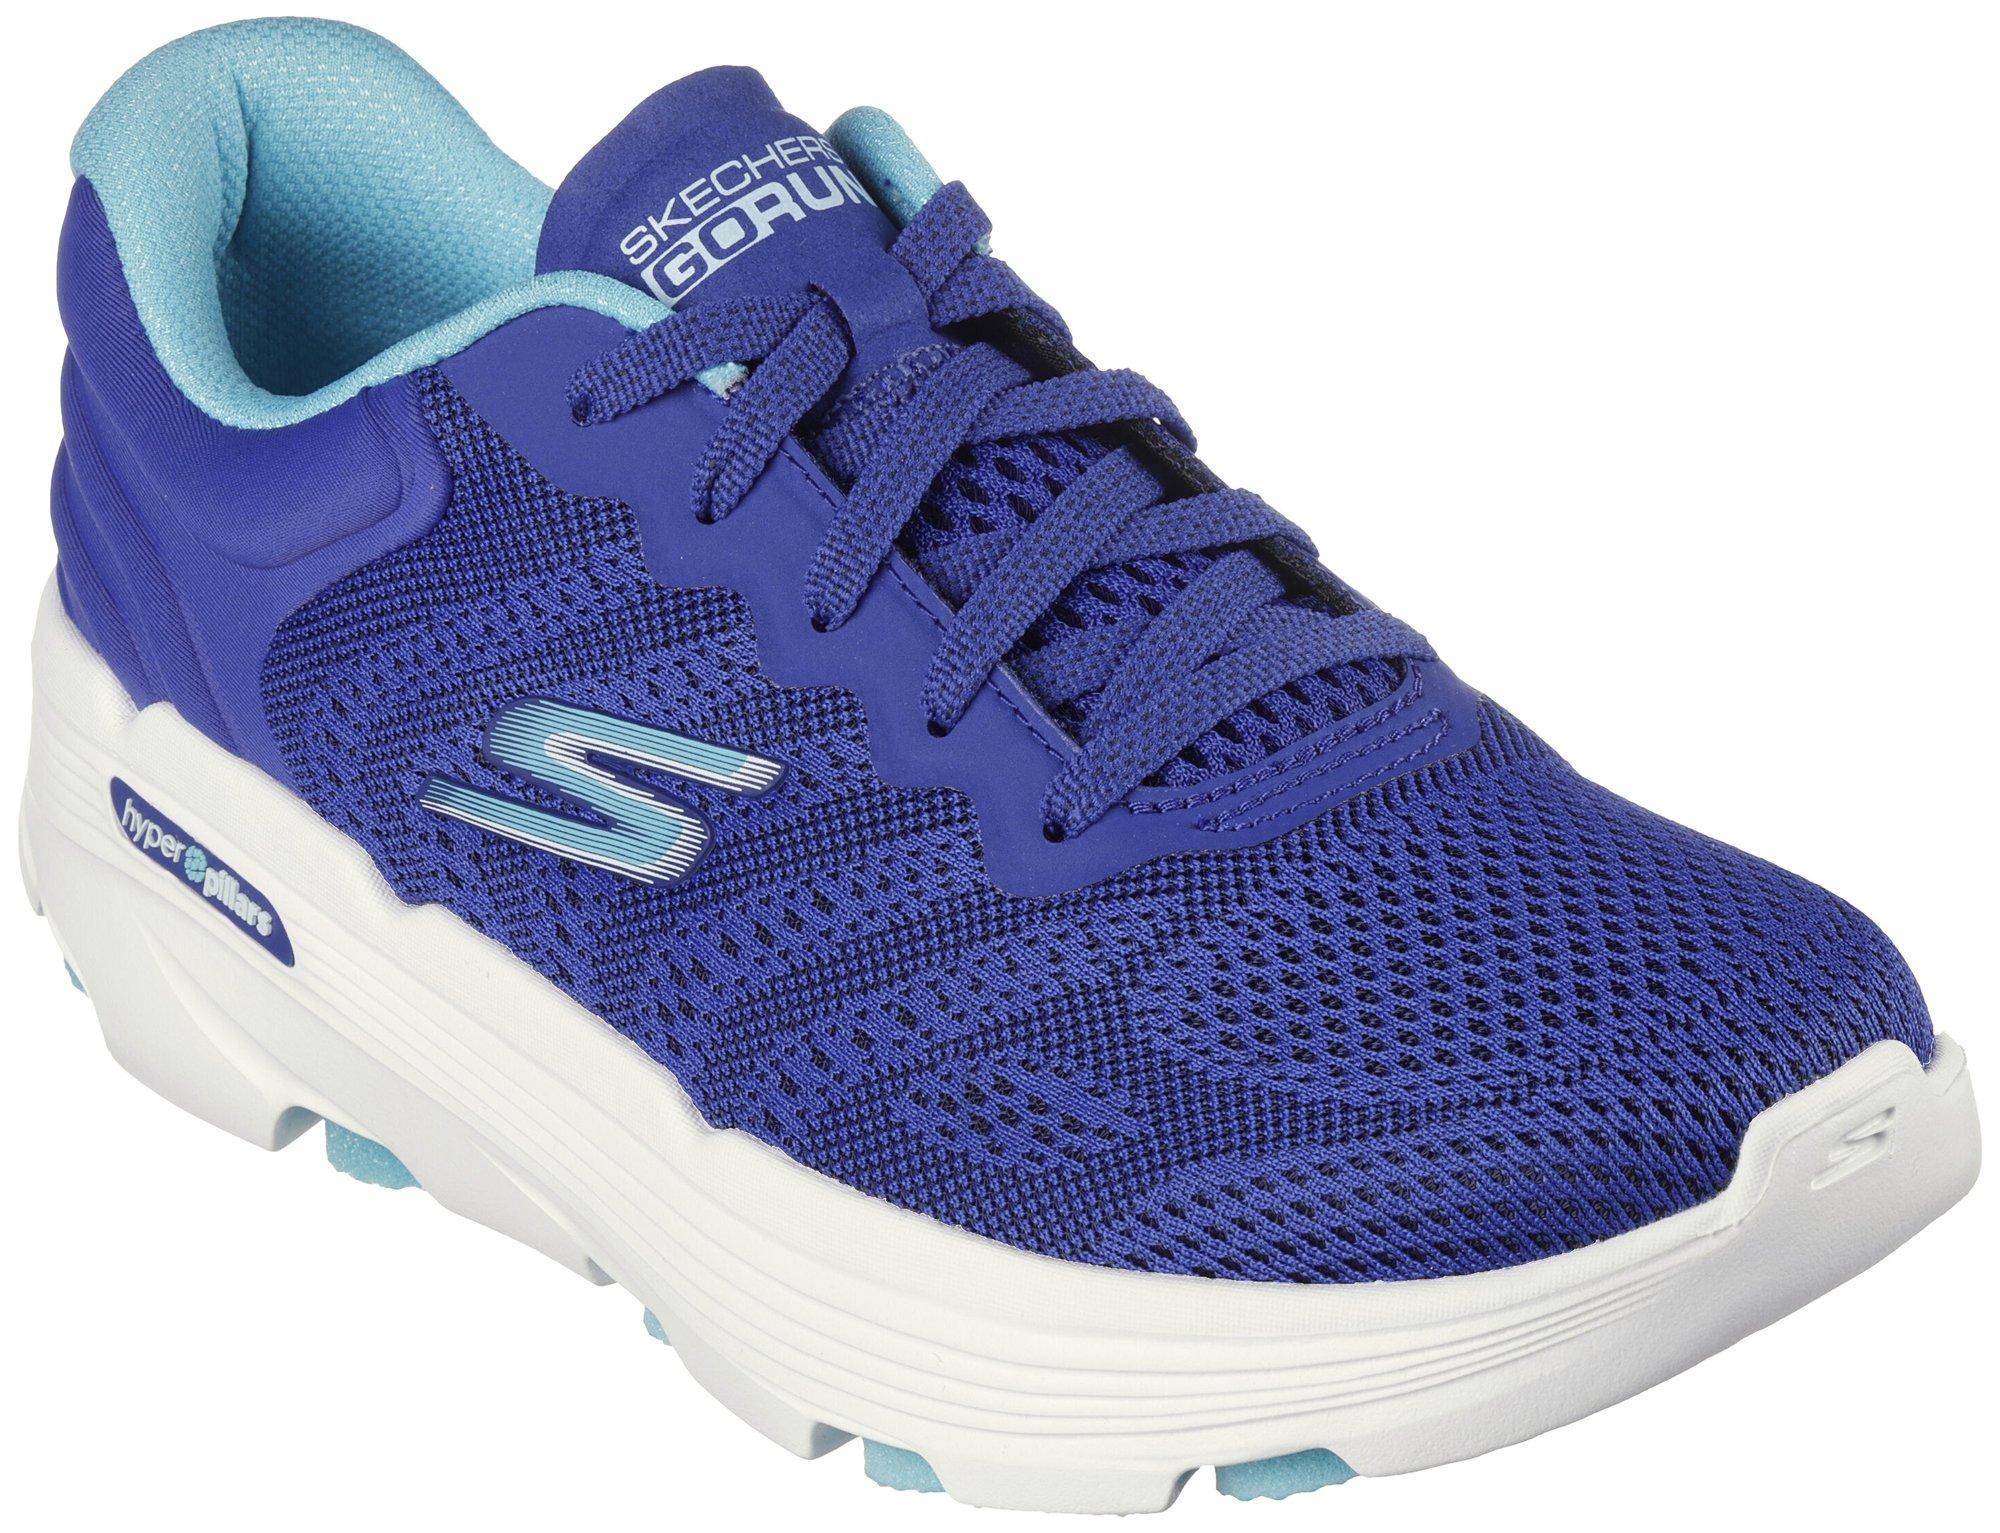 Womens GO Run 7.0 Driven Athletic Shoes